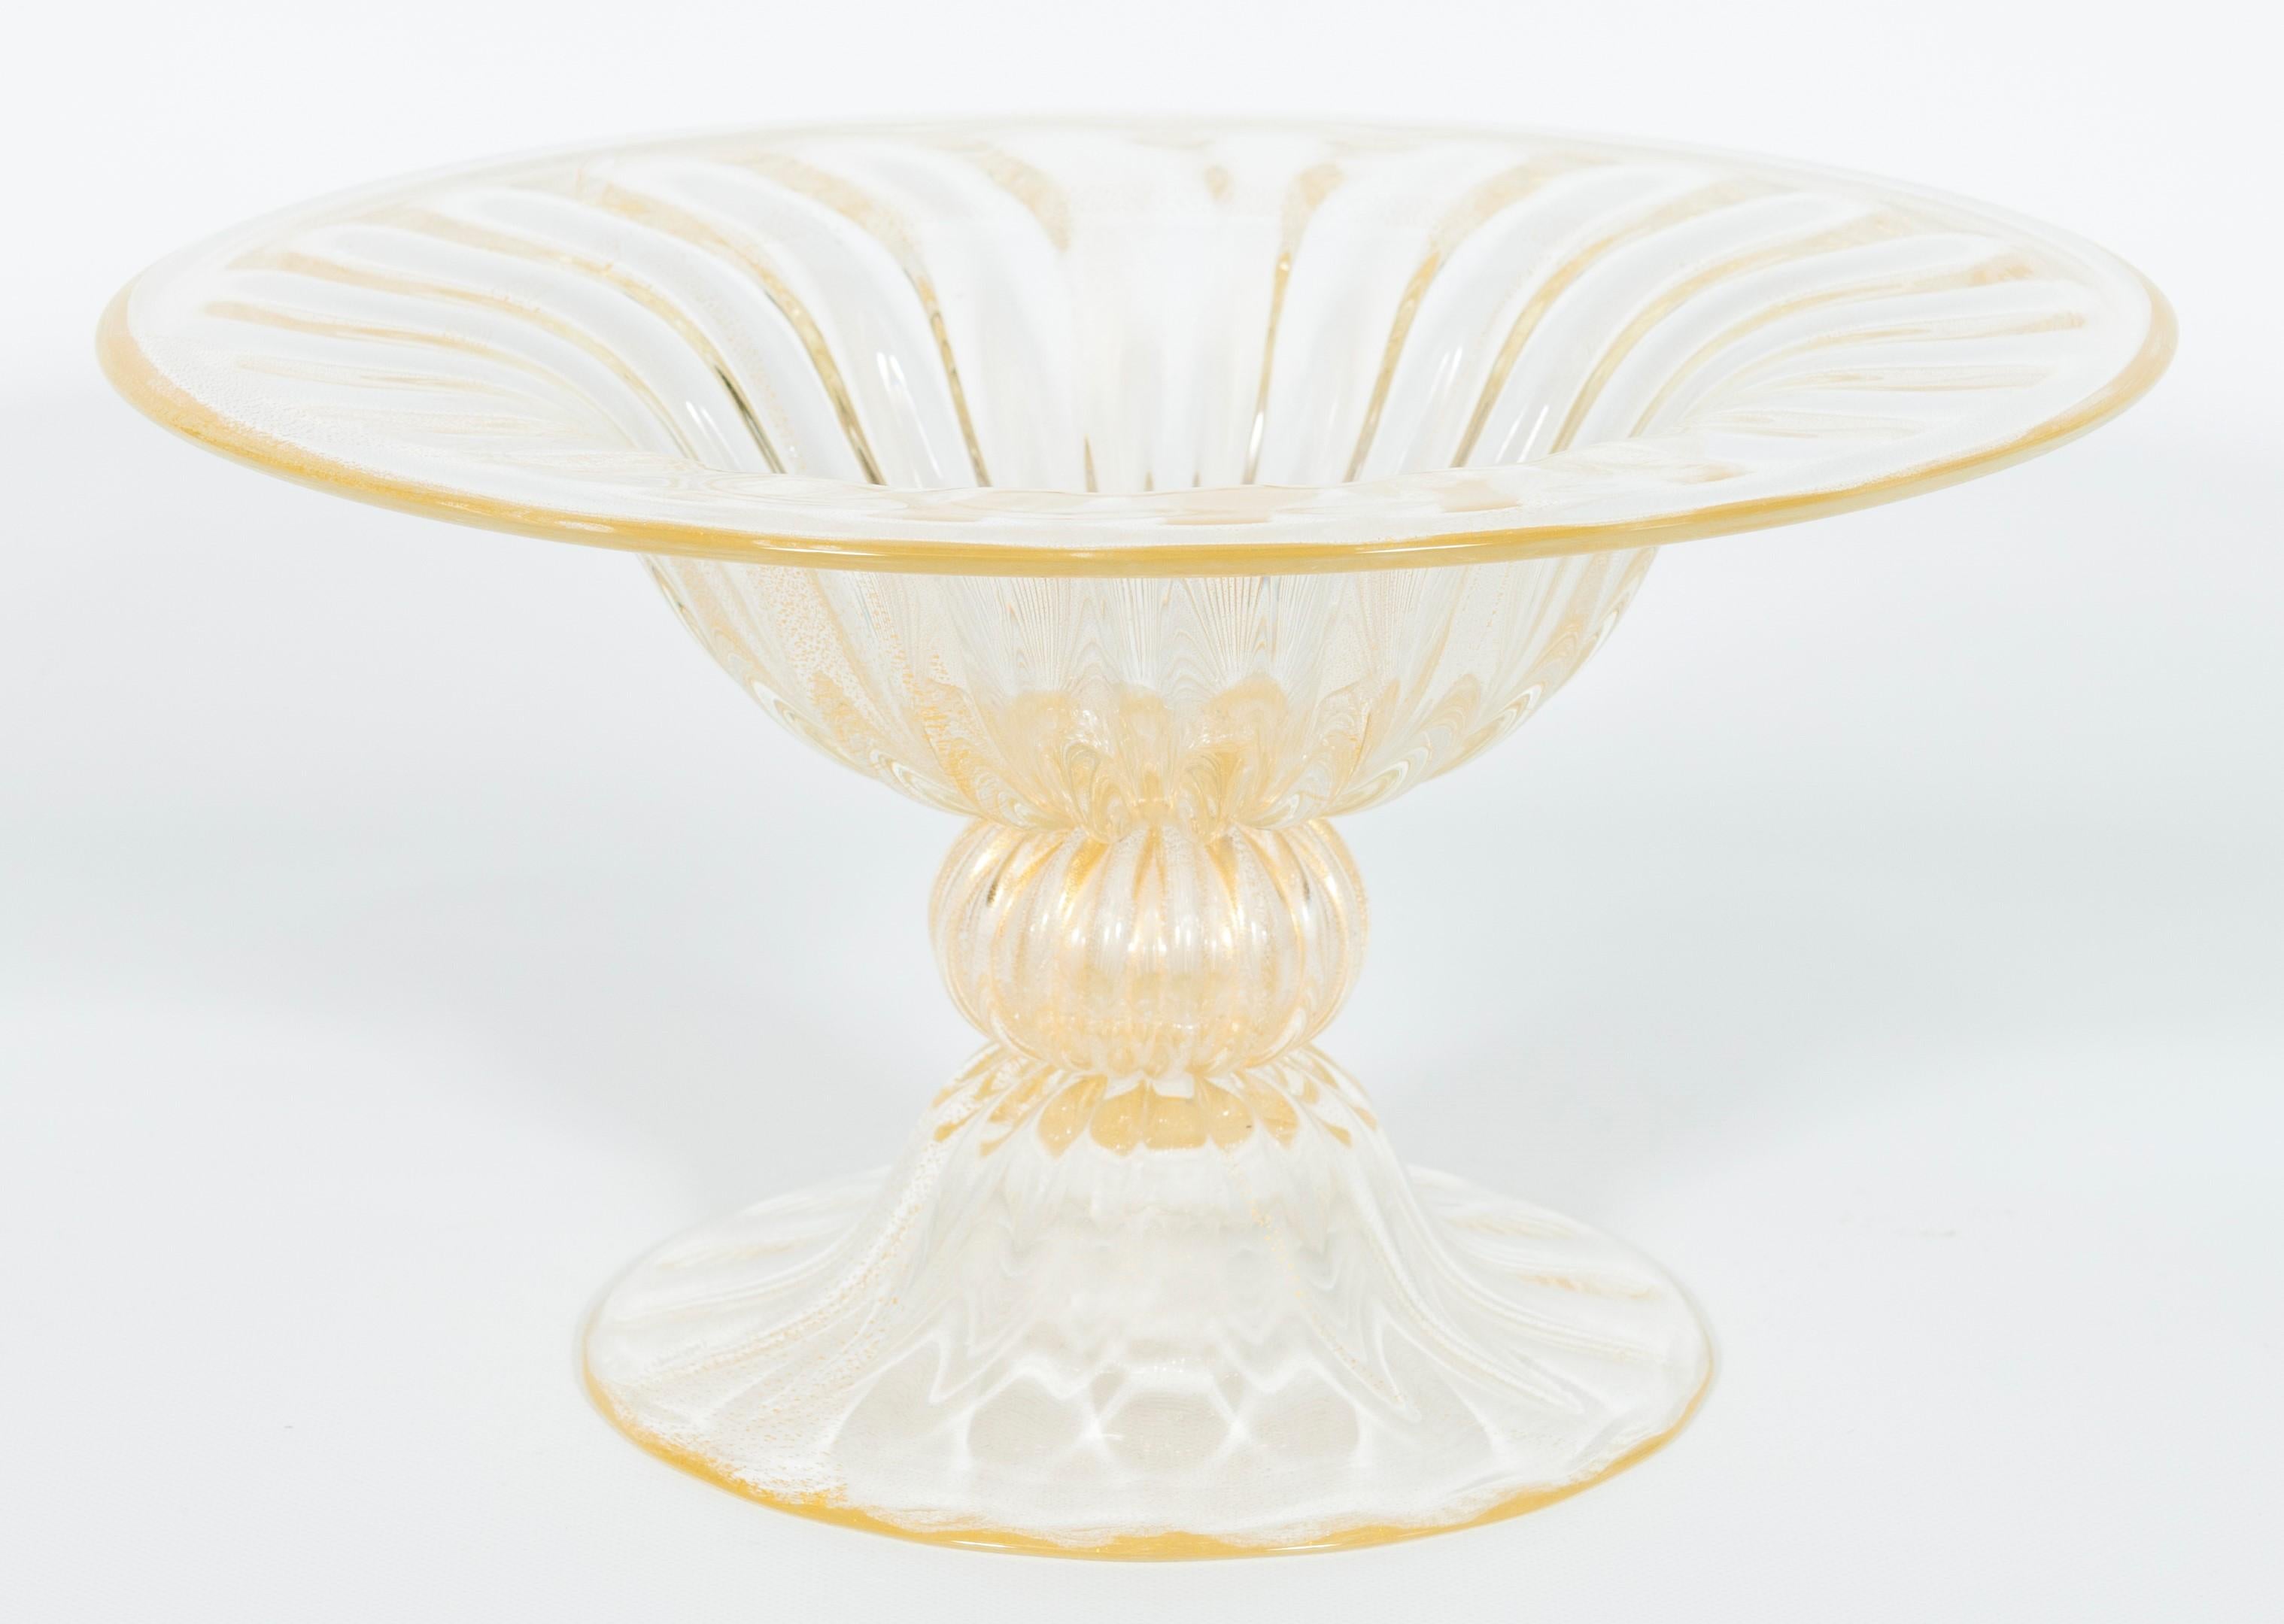 Contemporary Italian Murano glass decorative bowl with 24 carat gold, attributed to Alberto Donà, 2000s.
The base sustains a central sphere, and the bowl at the top. This artwork is made of transparent blown murano glass with sommerso gold flecks.